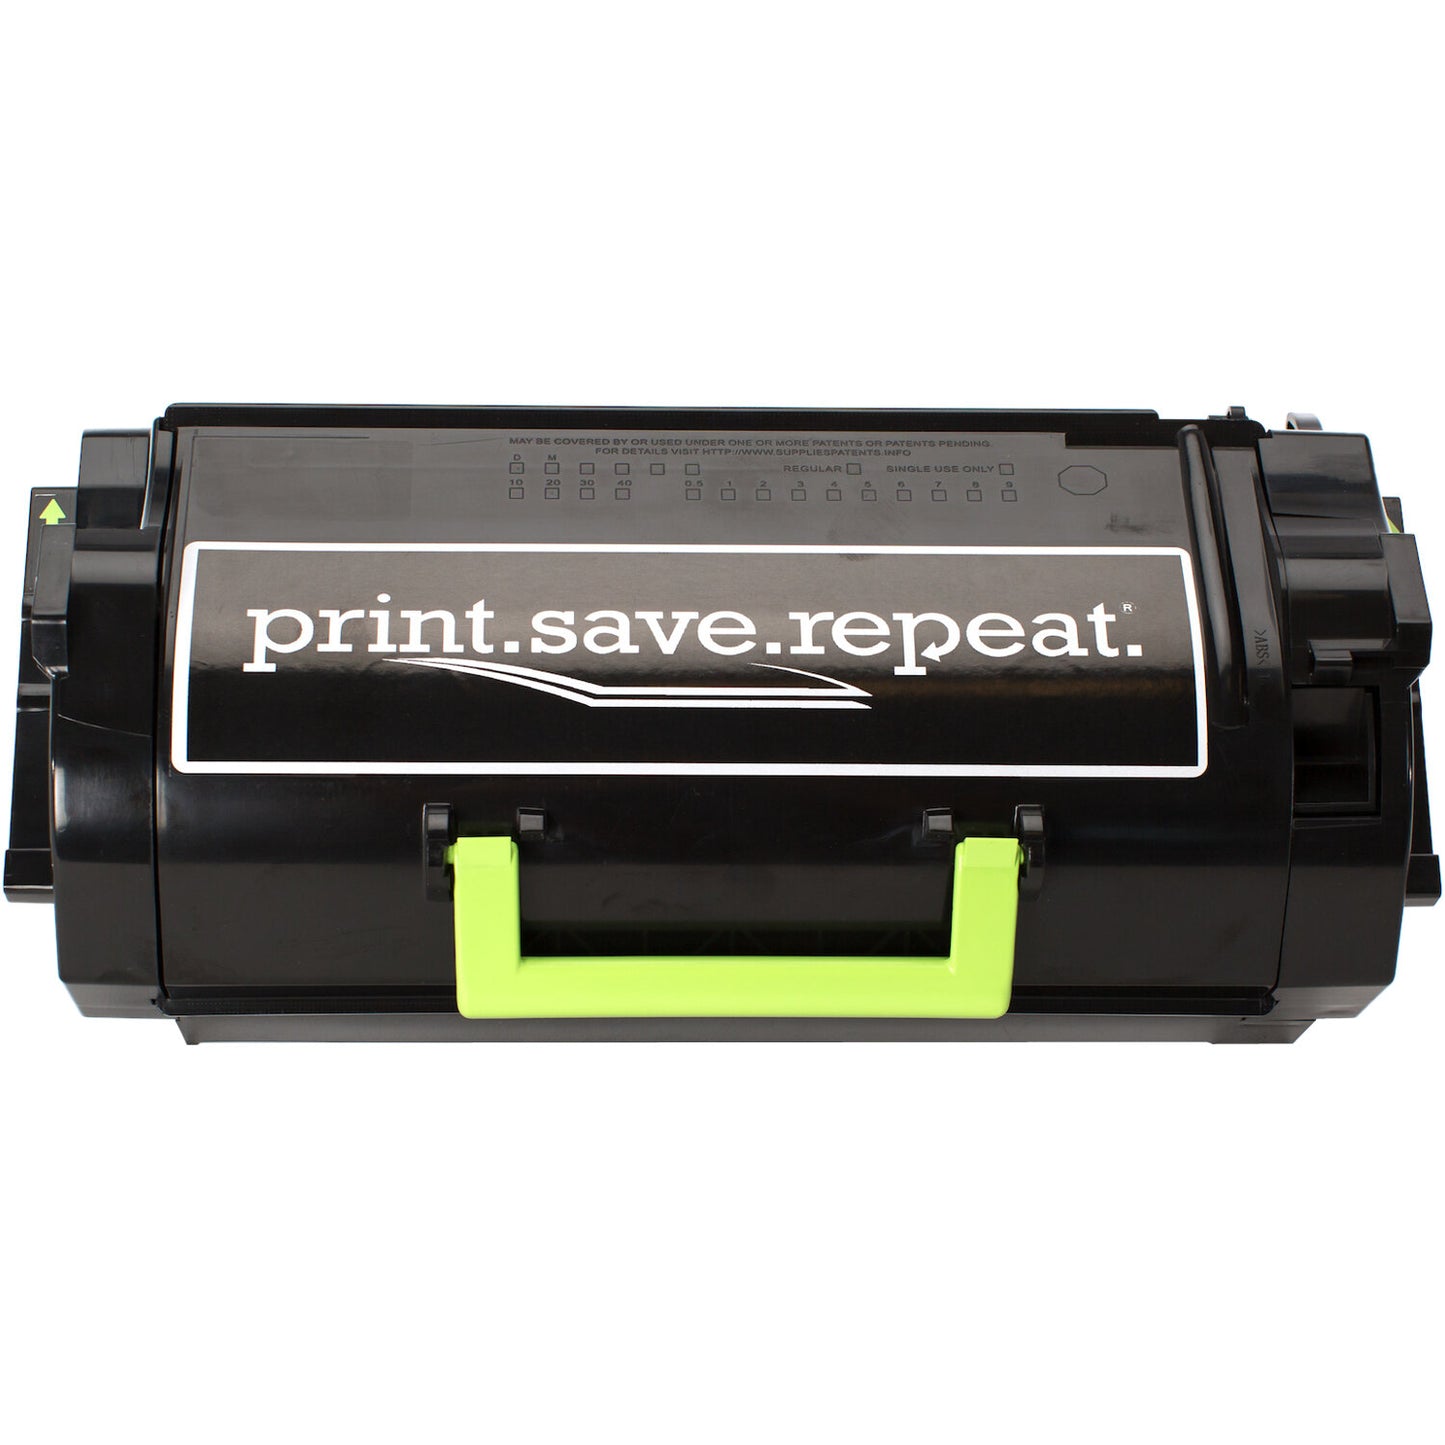 Print.Save.Repeat. Lexmark 24B6015 High Yield Remanufactured Toner Cartridge for M5155, M5163, M5170, XM5163, XM5170 [35,000 Pages]